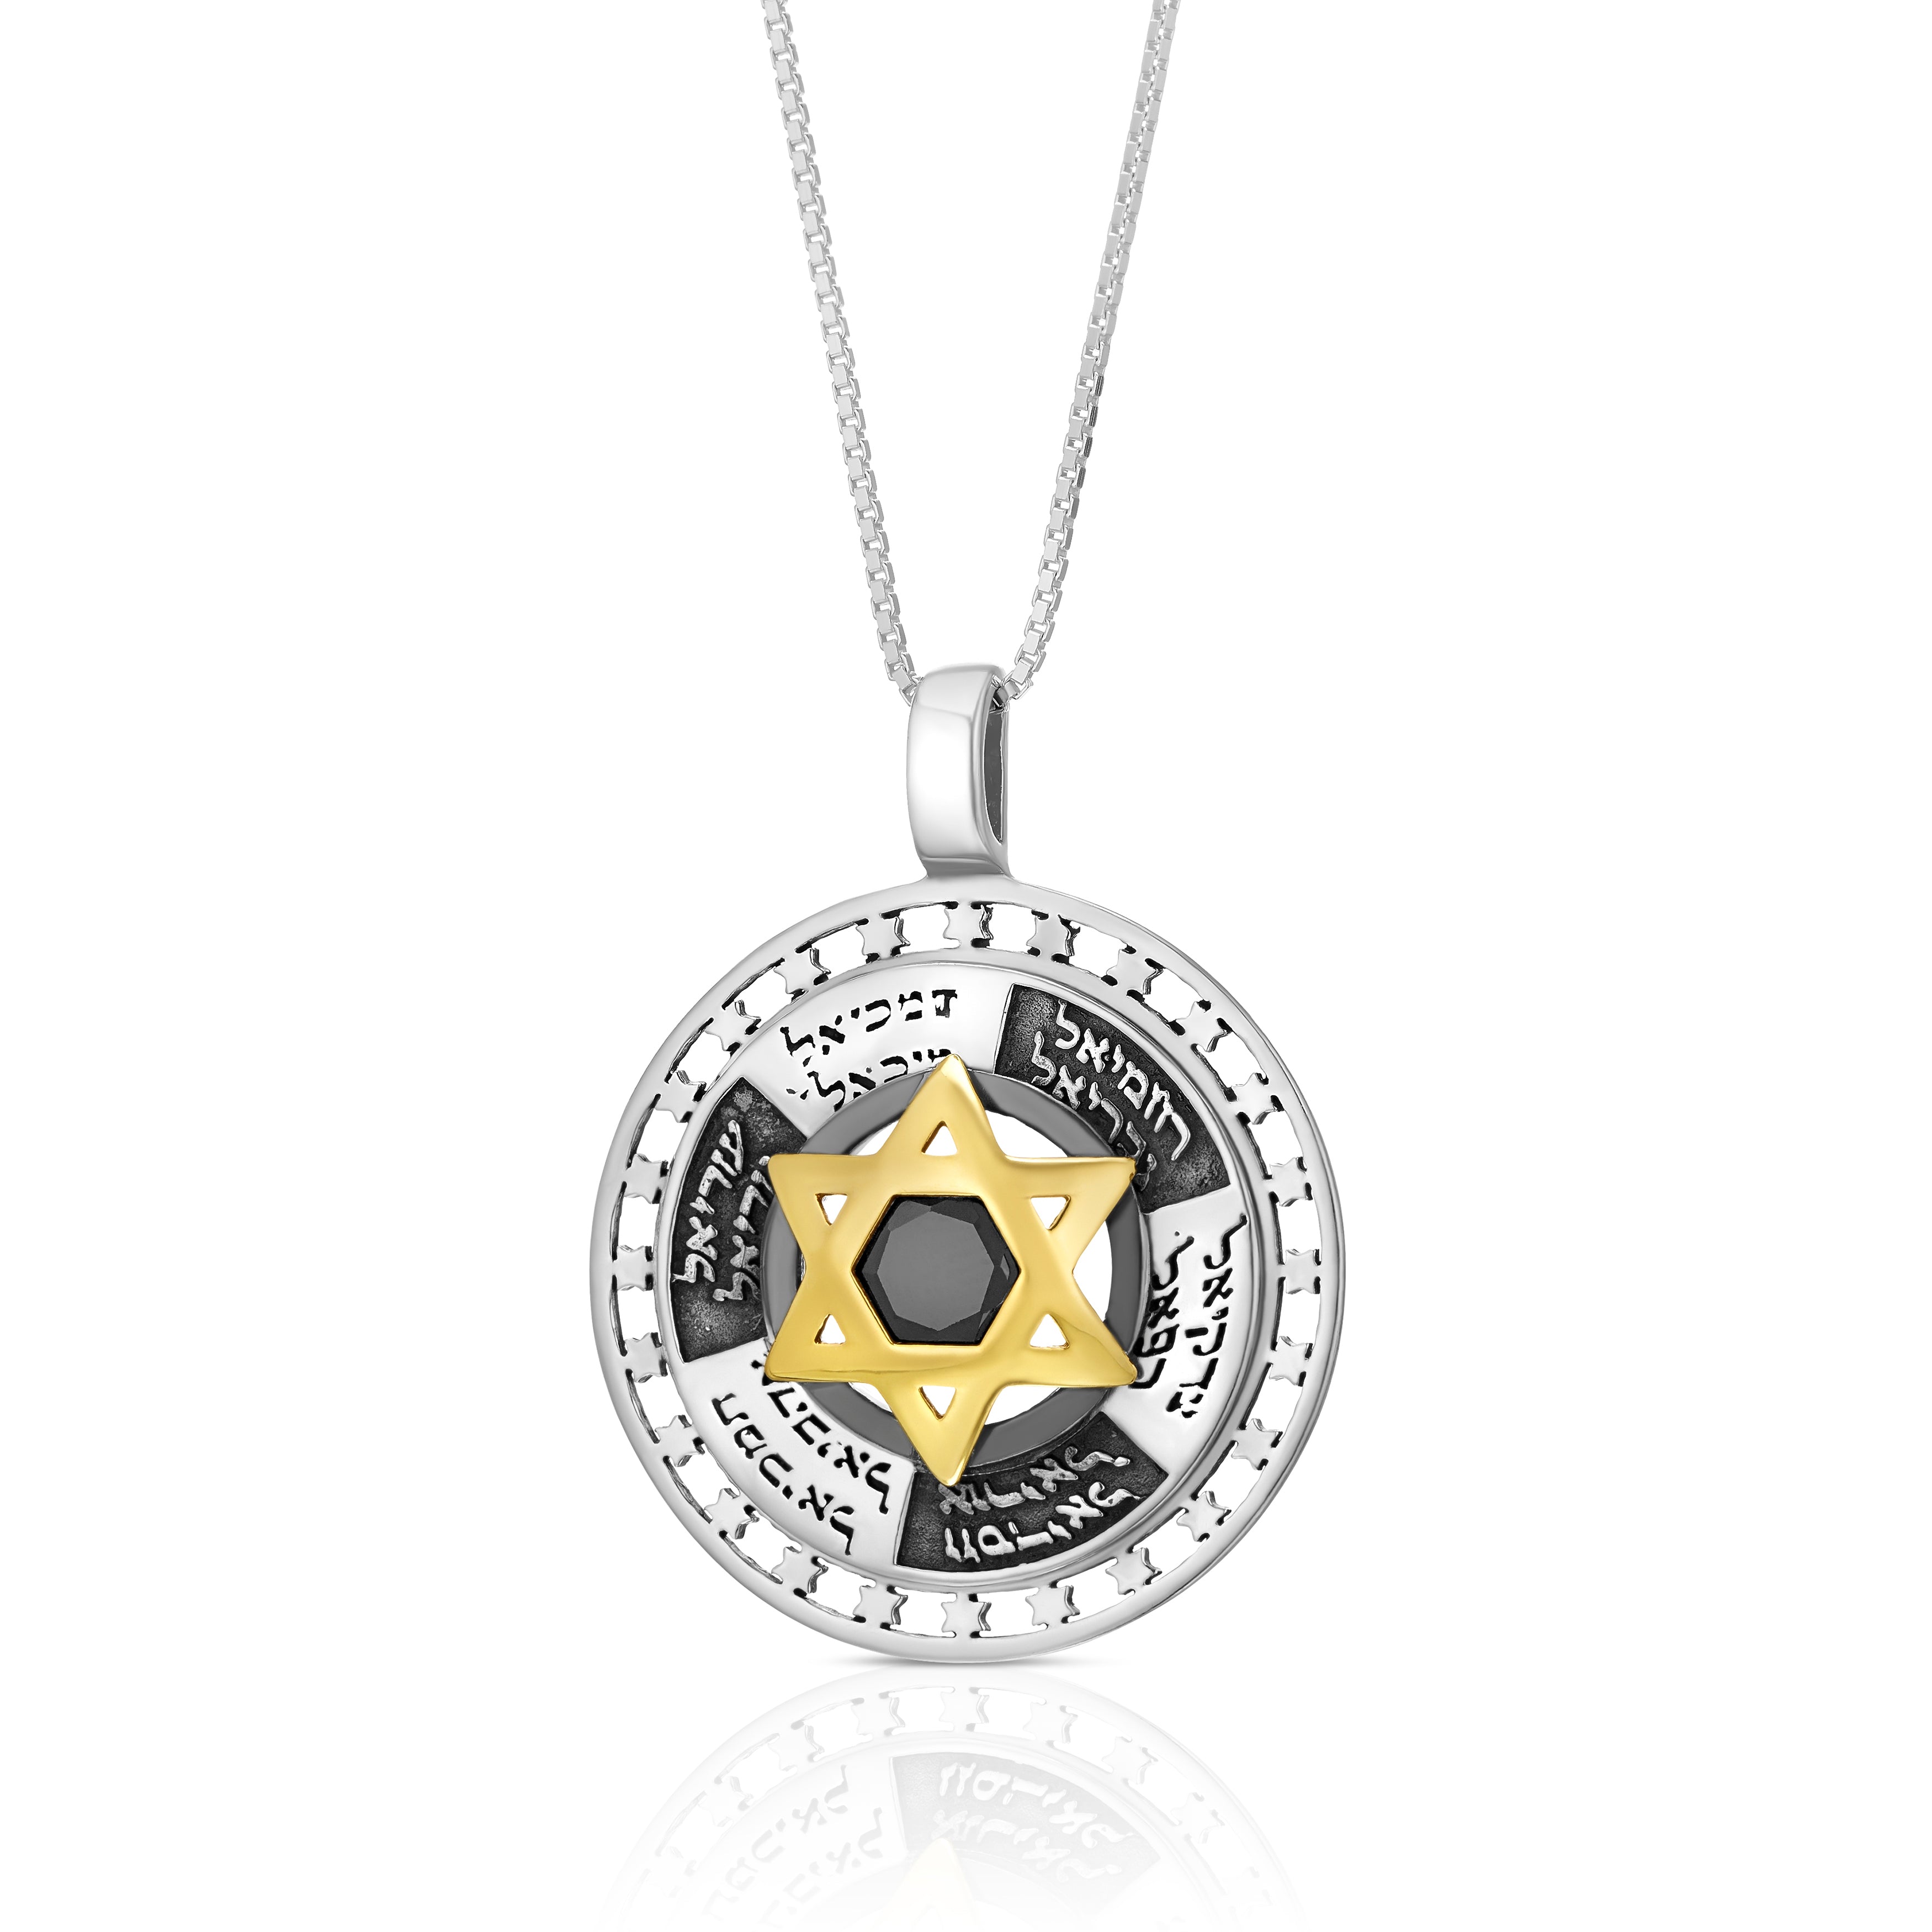 Silver pendant with a gold Star